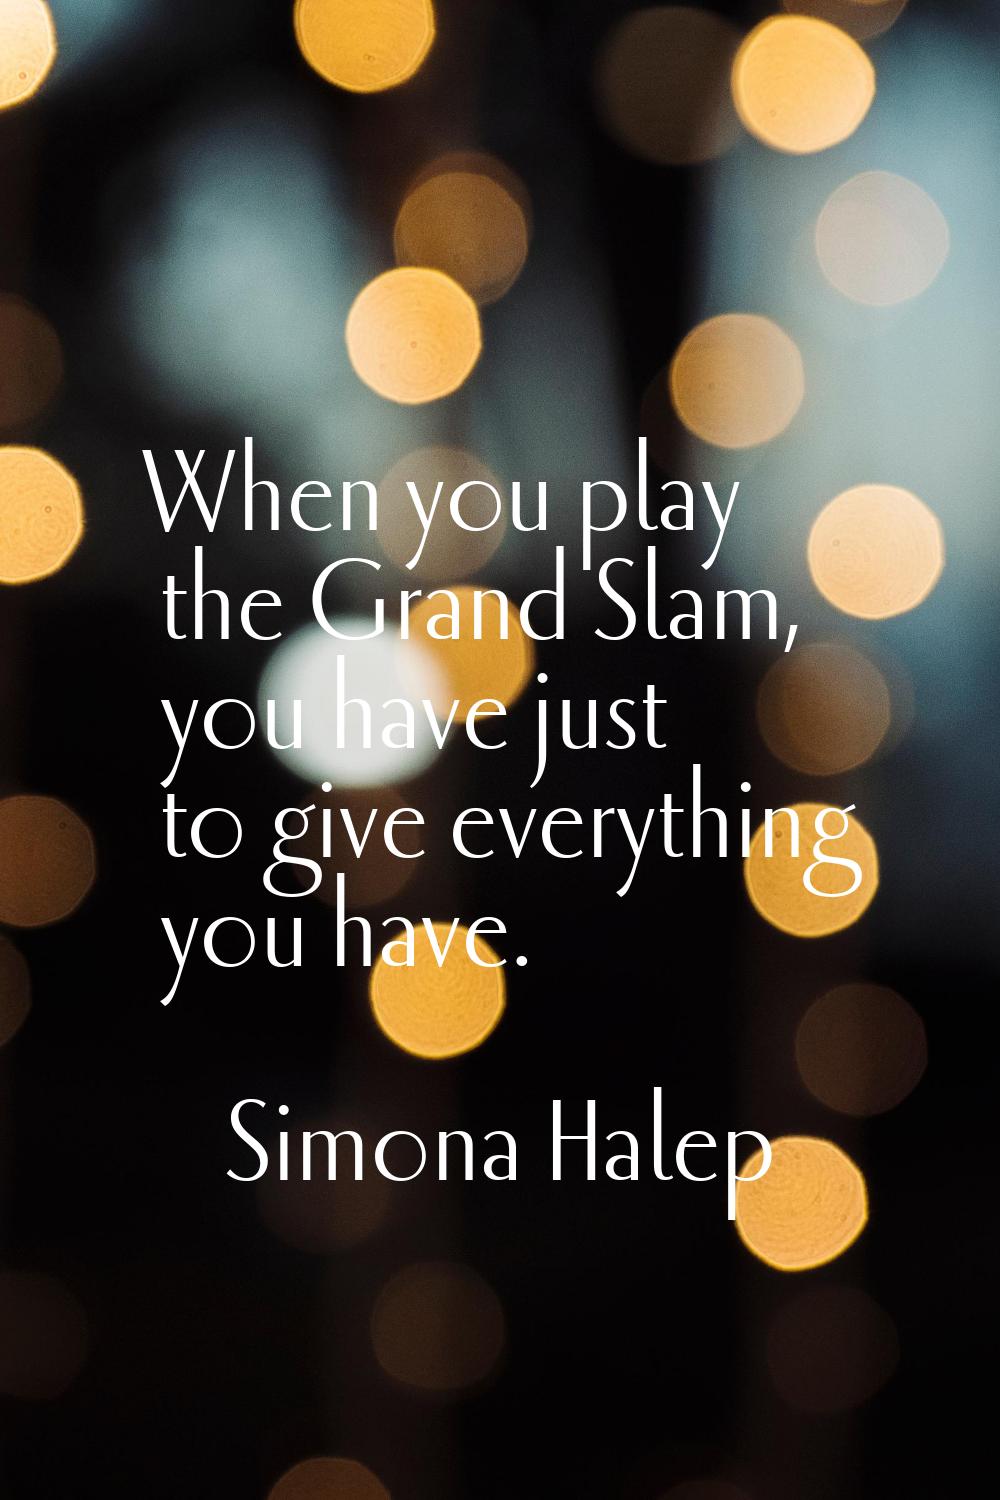 When you play the Grand Slam, you have just to give everything you have.